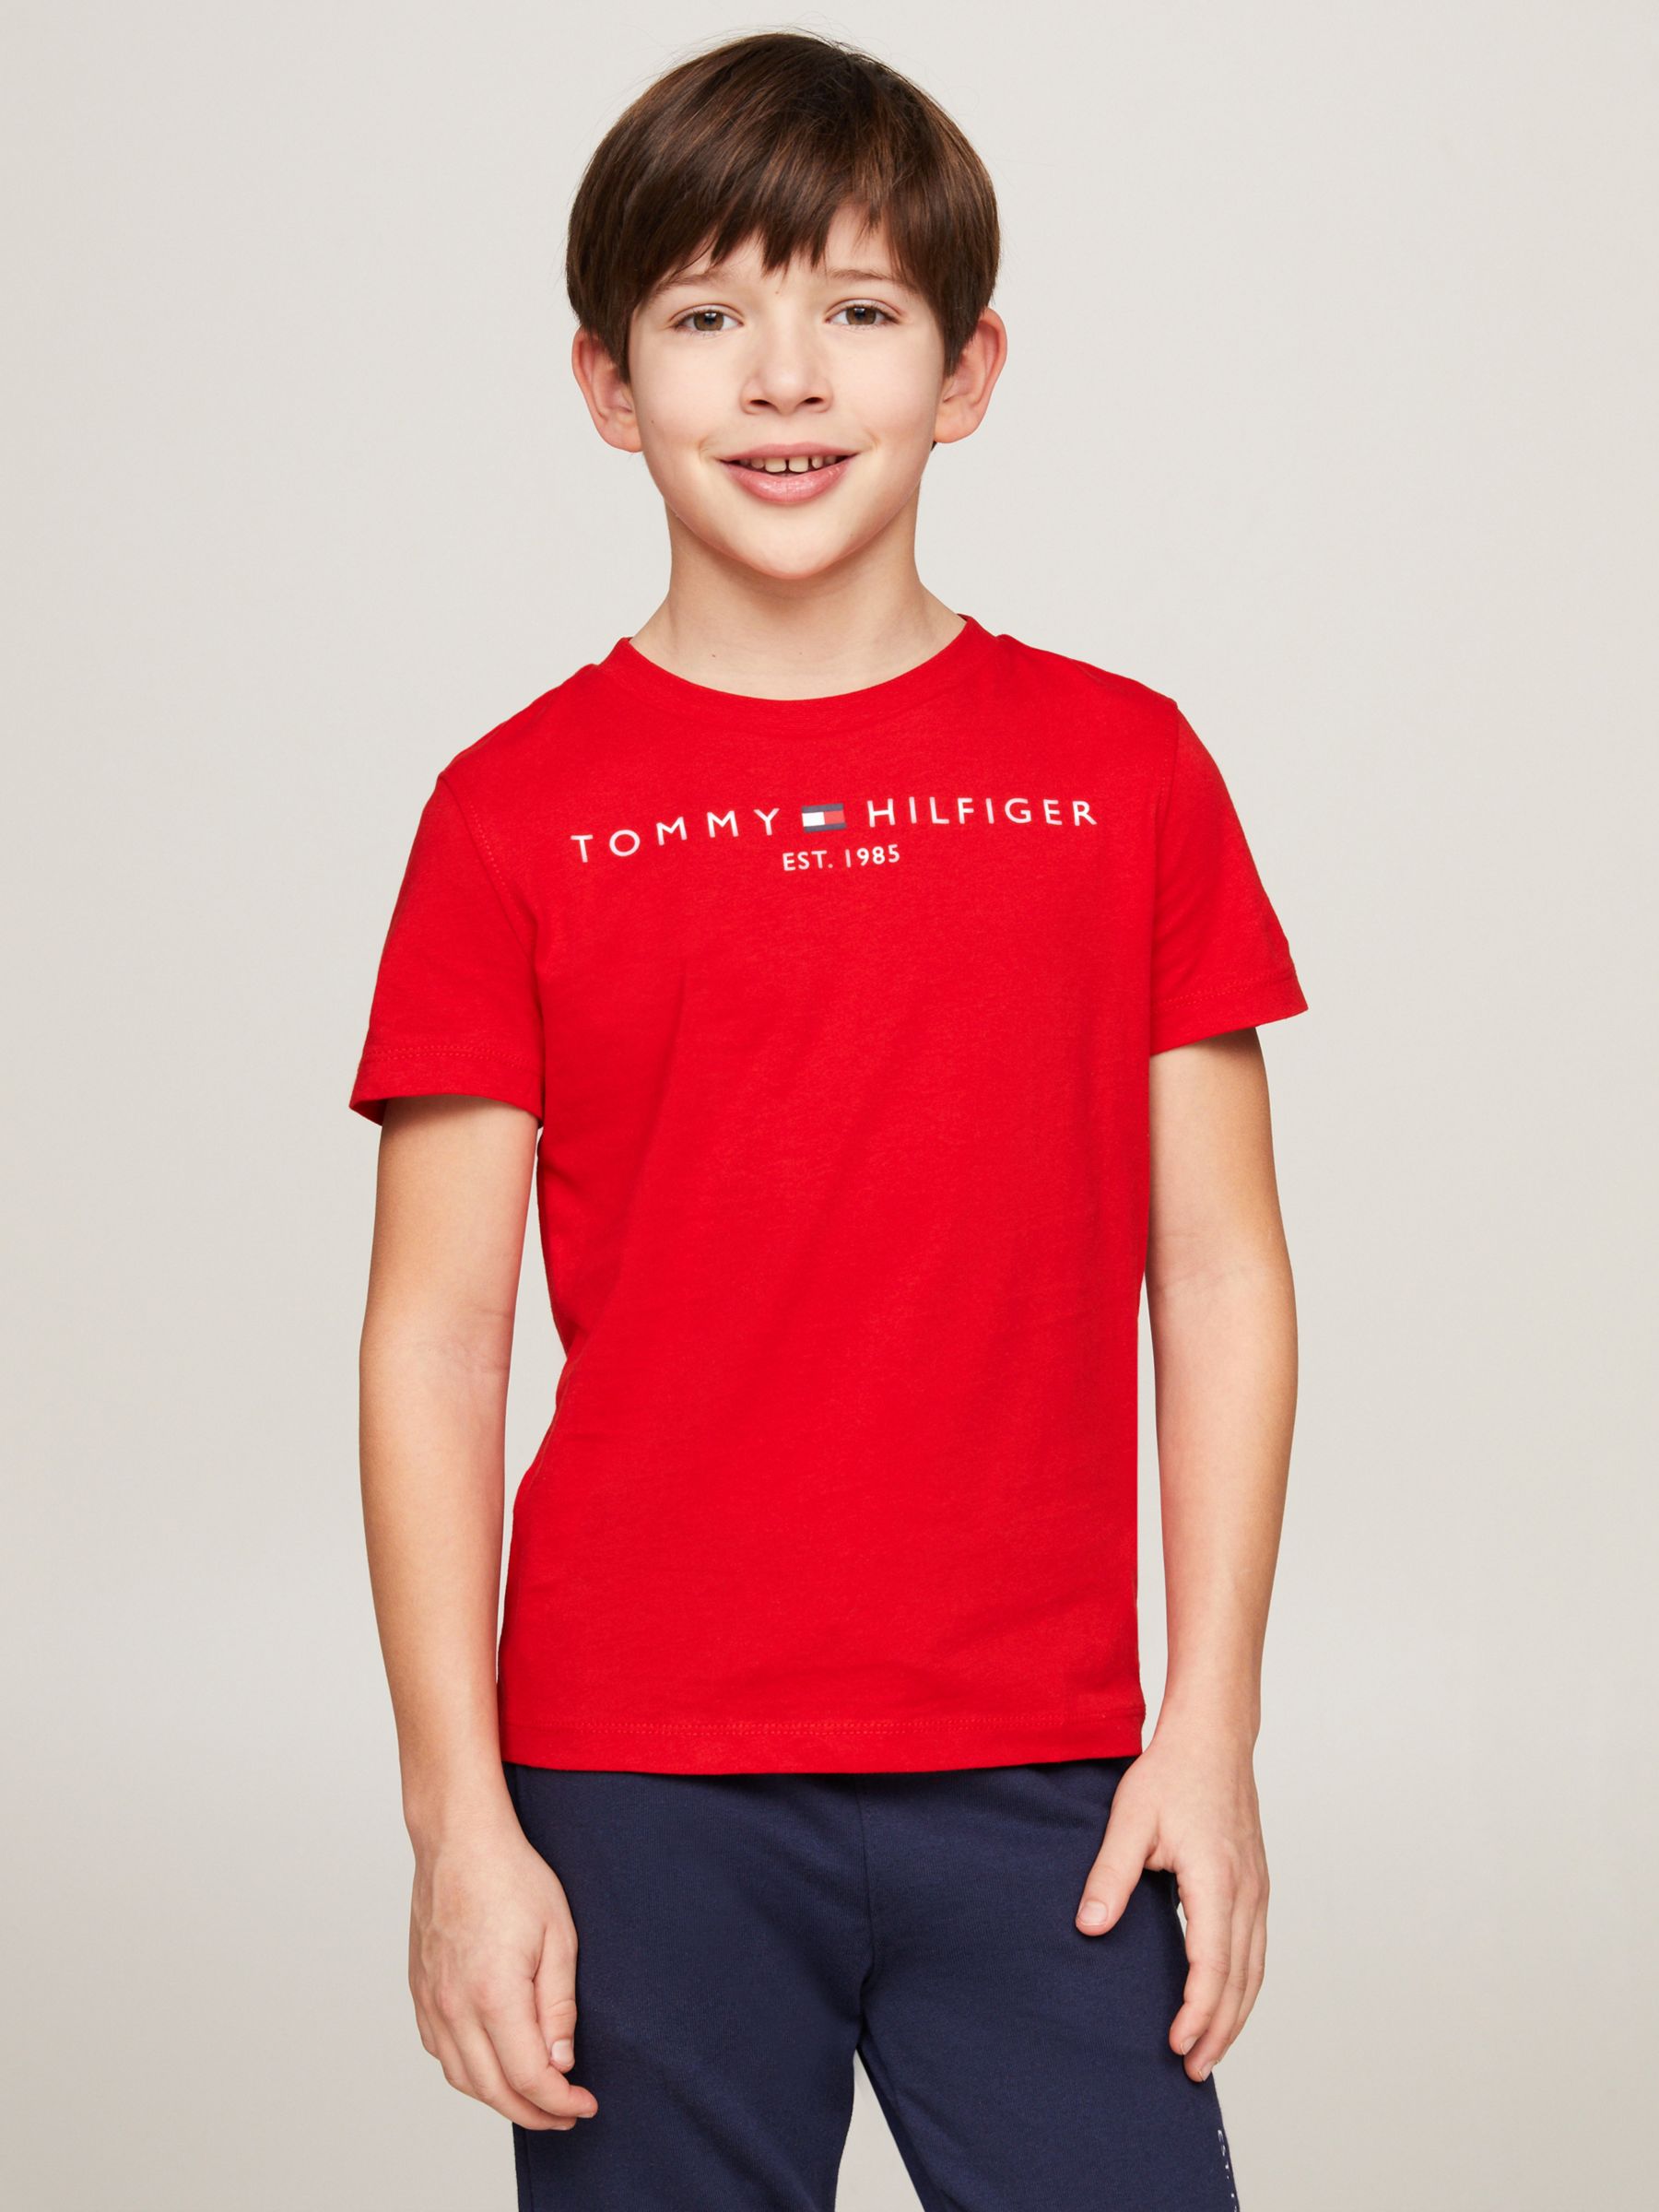 isolation Zoologisk have Partina City Tommy Hilfiger Kids' Essential Organic Cotton Logo Tee, Deep Crimson Red at  John Lewis & Partners